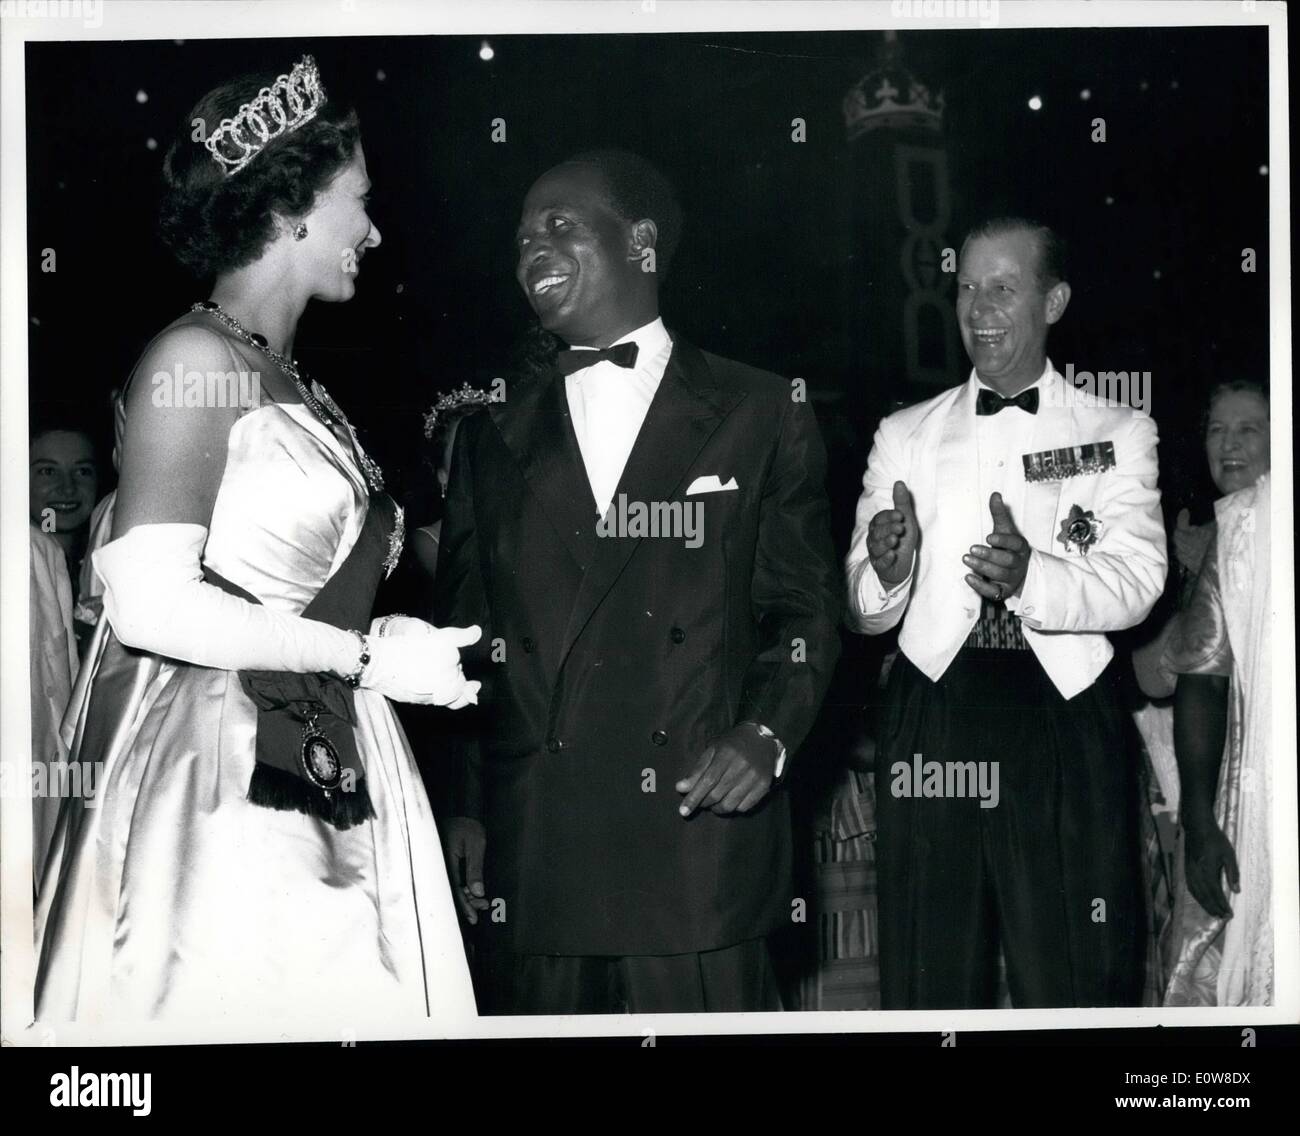 Nov. 11, 1961 - Fincher Royal Tour Of Ghana. The Queen at the High Life  Ball at